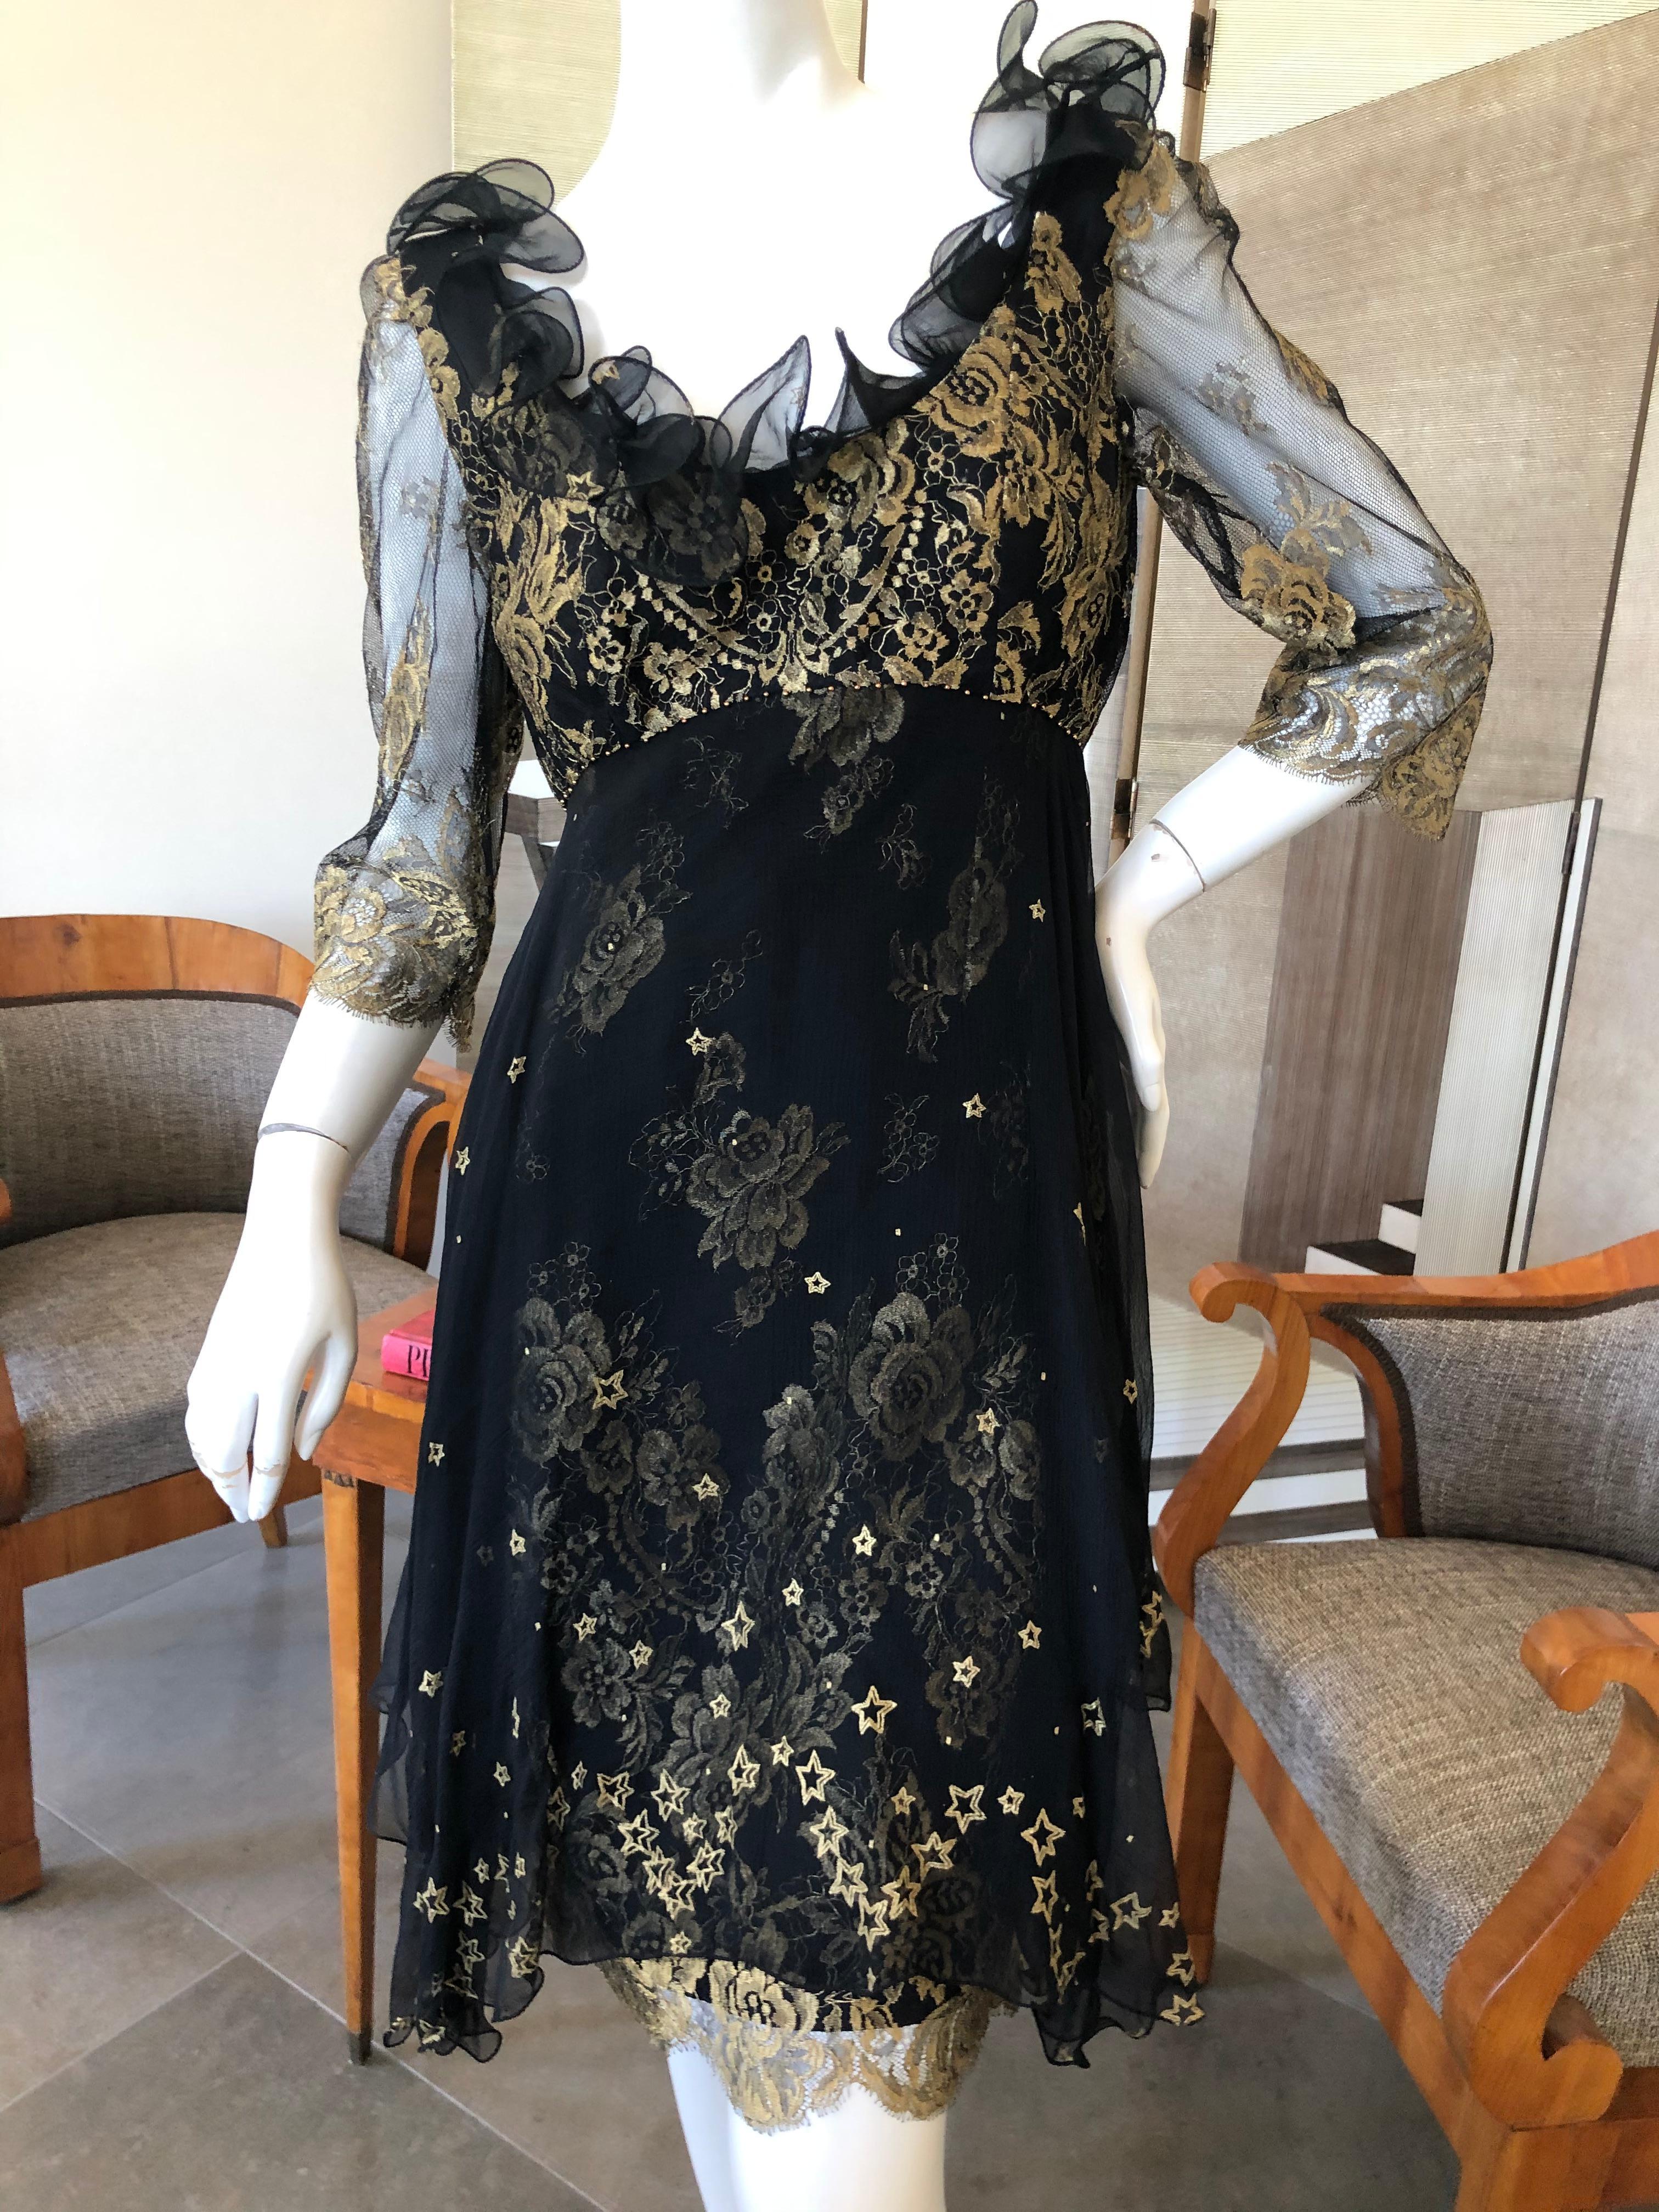 Zandra Rhodes London for Saks Fifth Avenue 80's Gold Lace Ruffled Dress.
This is so beautiful, please see all the photos.
Size UK 14, US 12 in eighties size is more like 6-8 today.
Bust 36